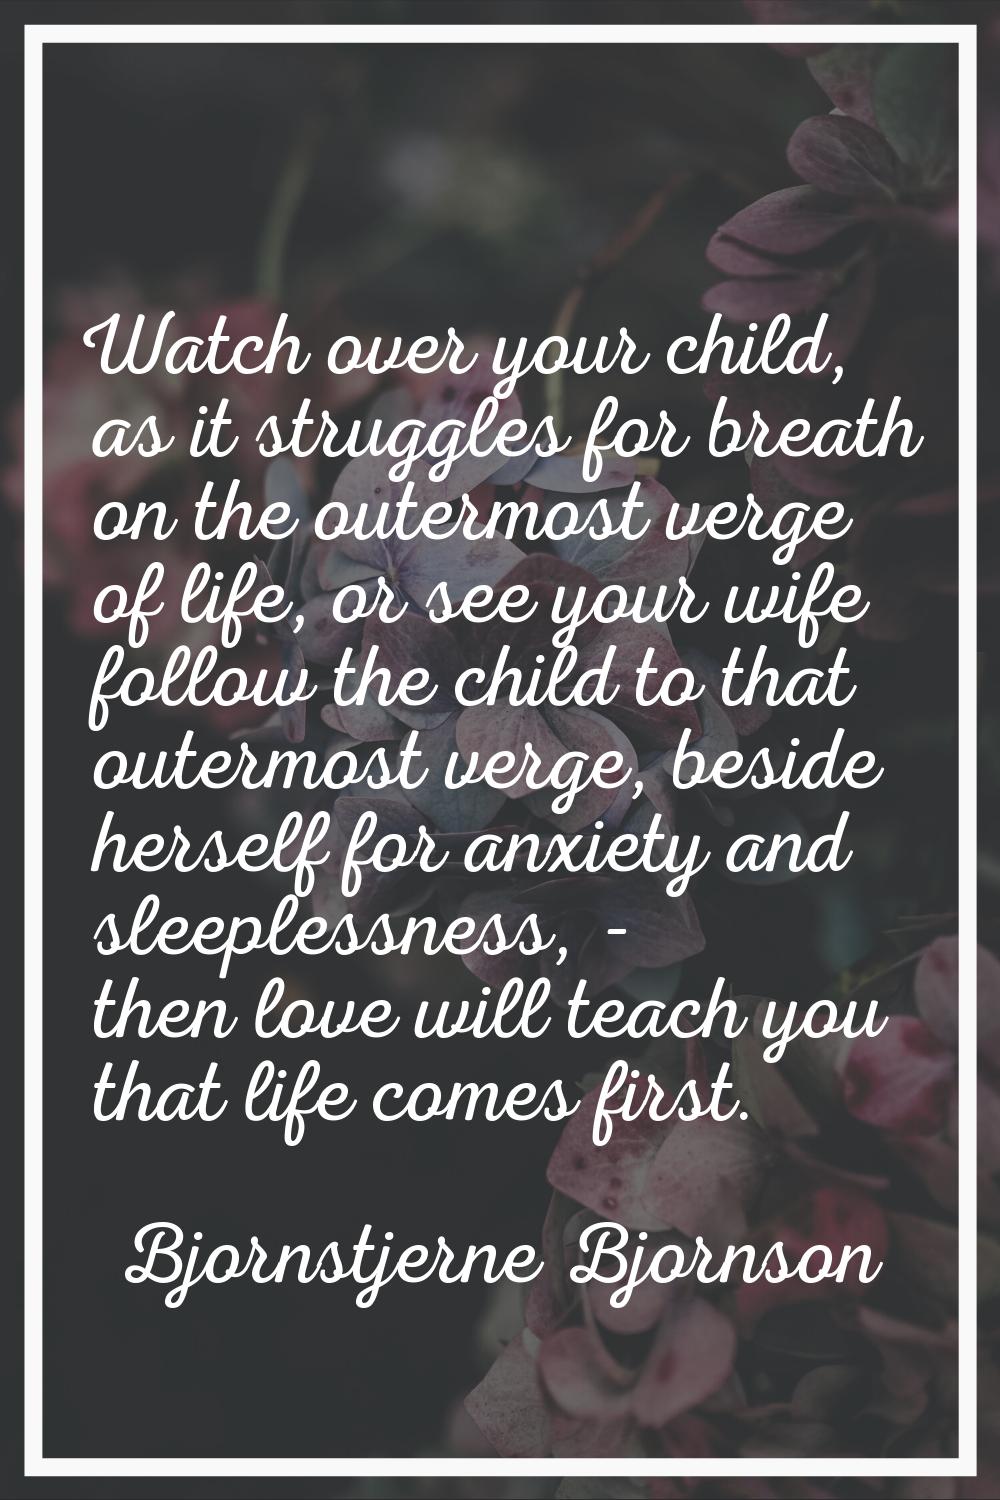 Watch over your child, as it struggles for breath on the outermost verge of life, or see your wife 